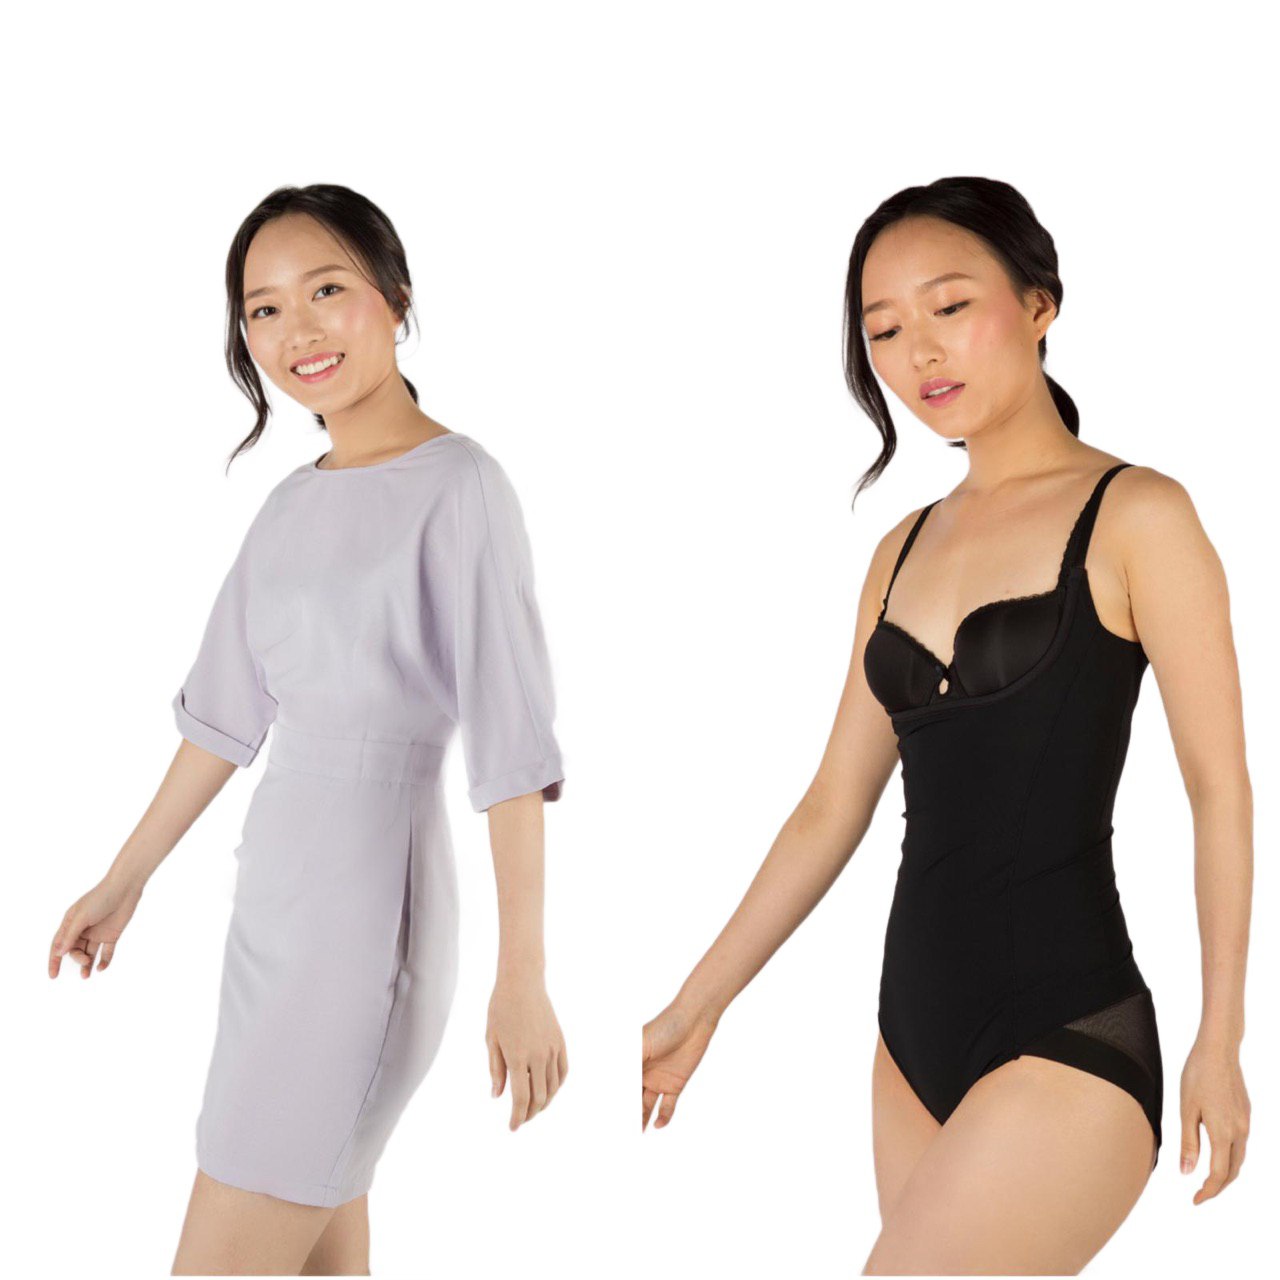 Mainichi-Shapewear - The most comfortable shape wear that you'll ever find  that actually does the job. You've got to try it for yourself! . . .  #mainichiwear #lingeries #lingeriesensual #alldayeveryday #panties # shapewear #